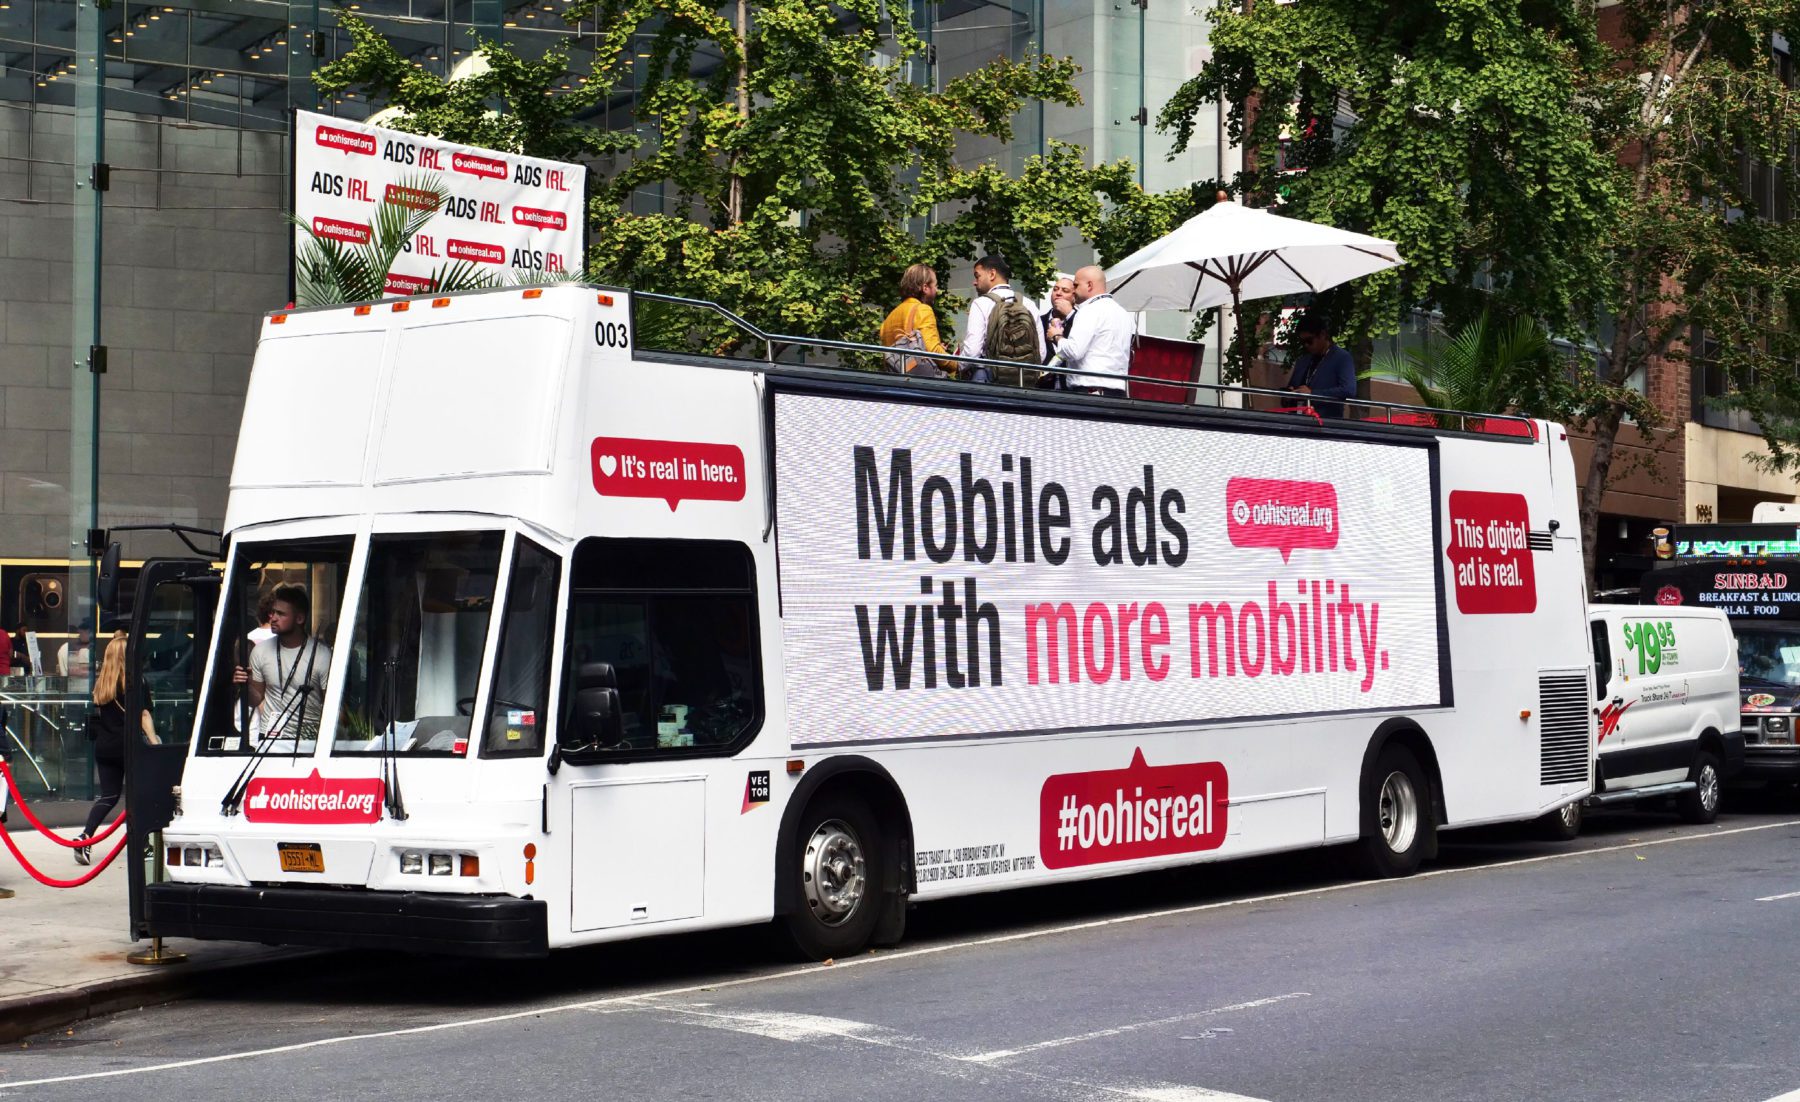 Bus out of home mobile advertisement with headline "Mobile ads with more mobility"